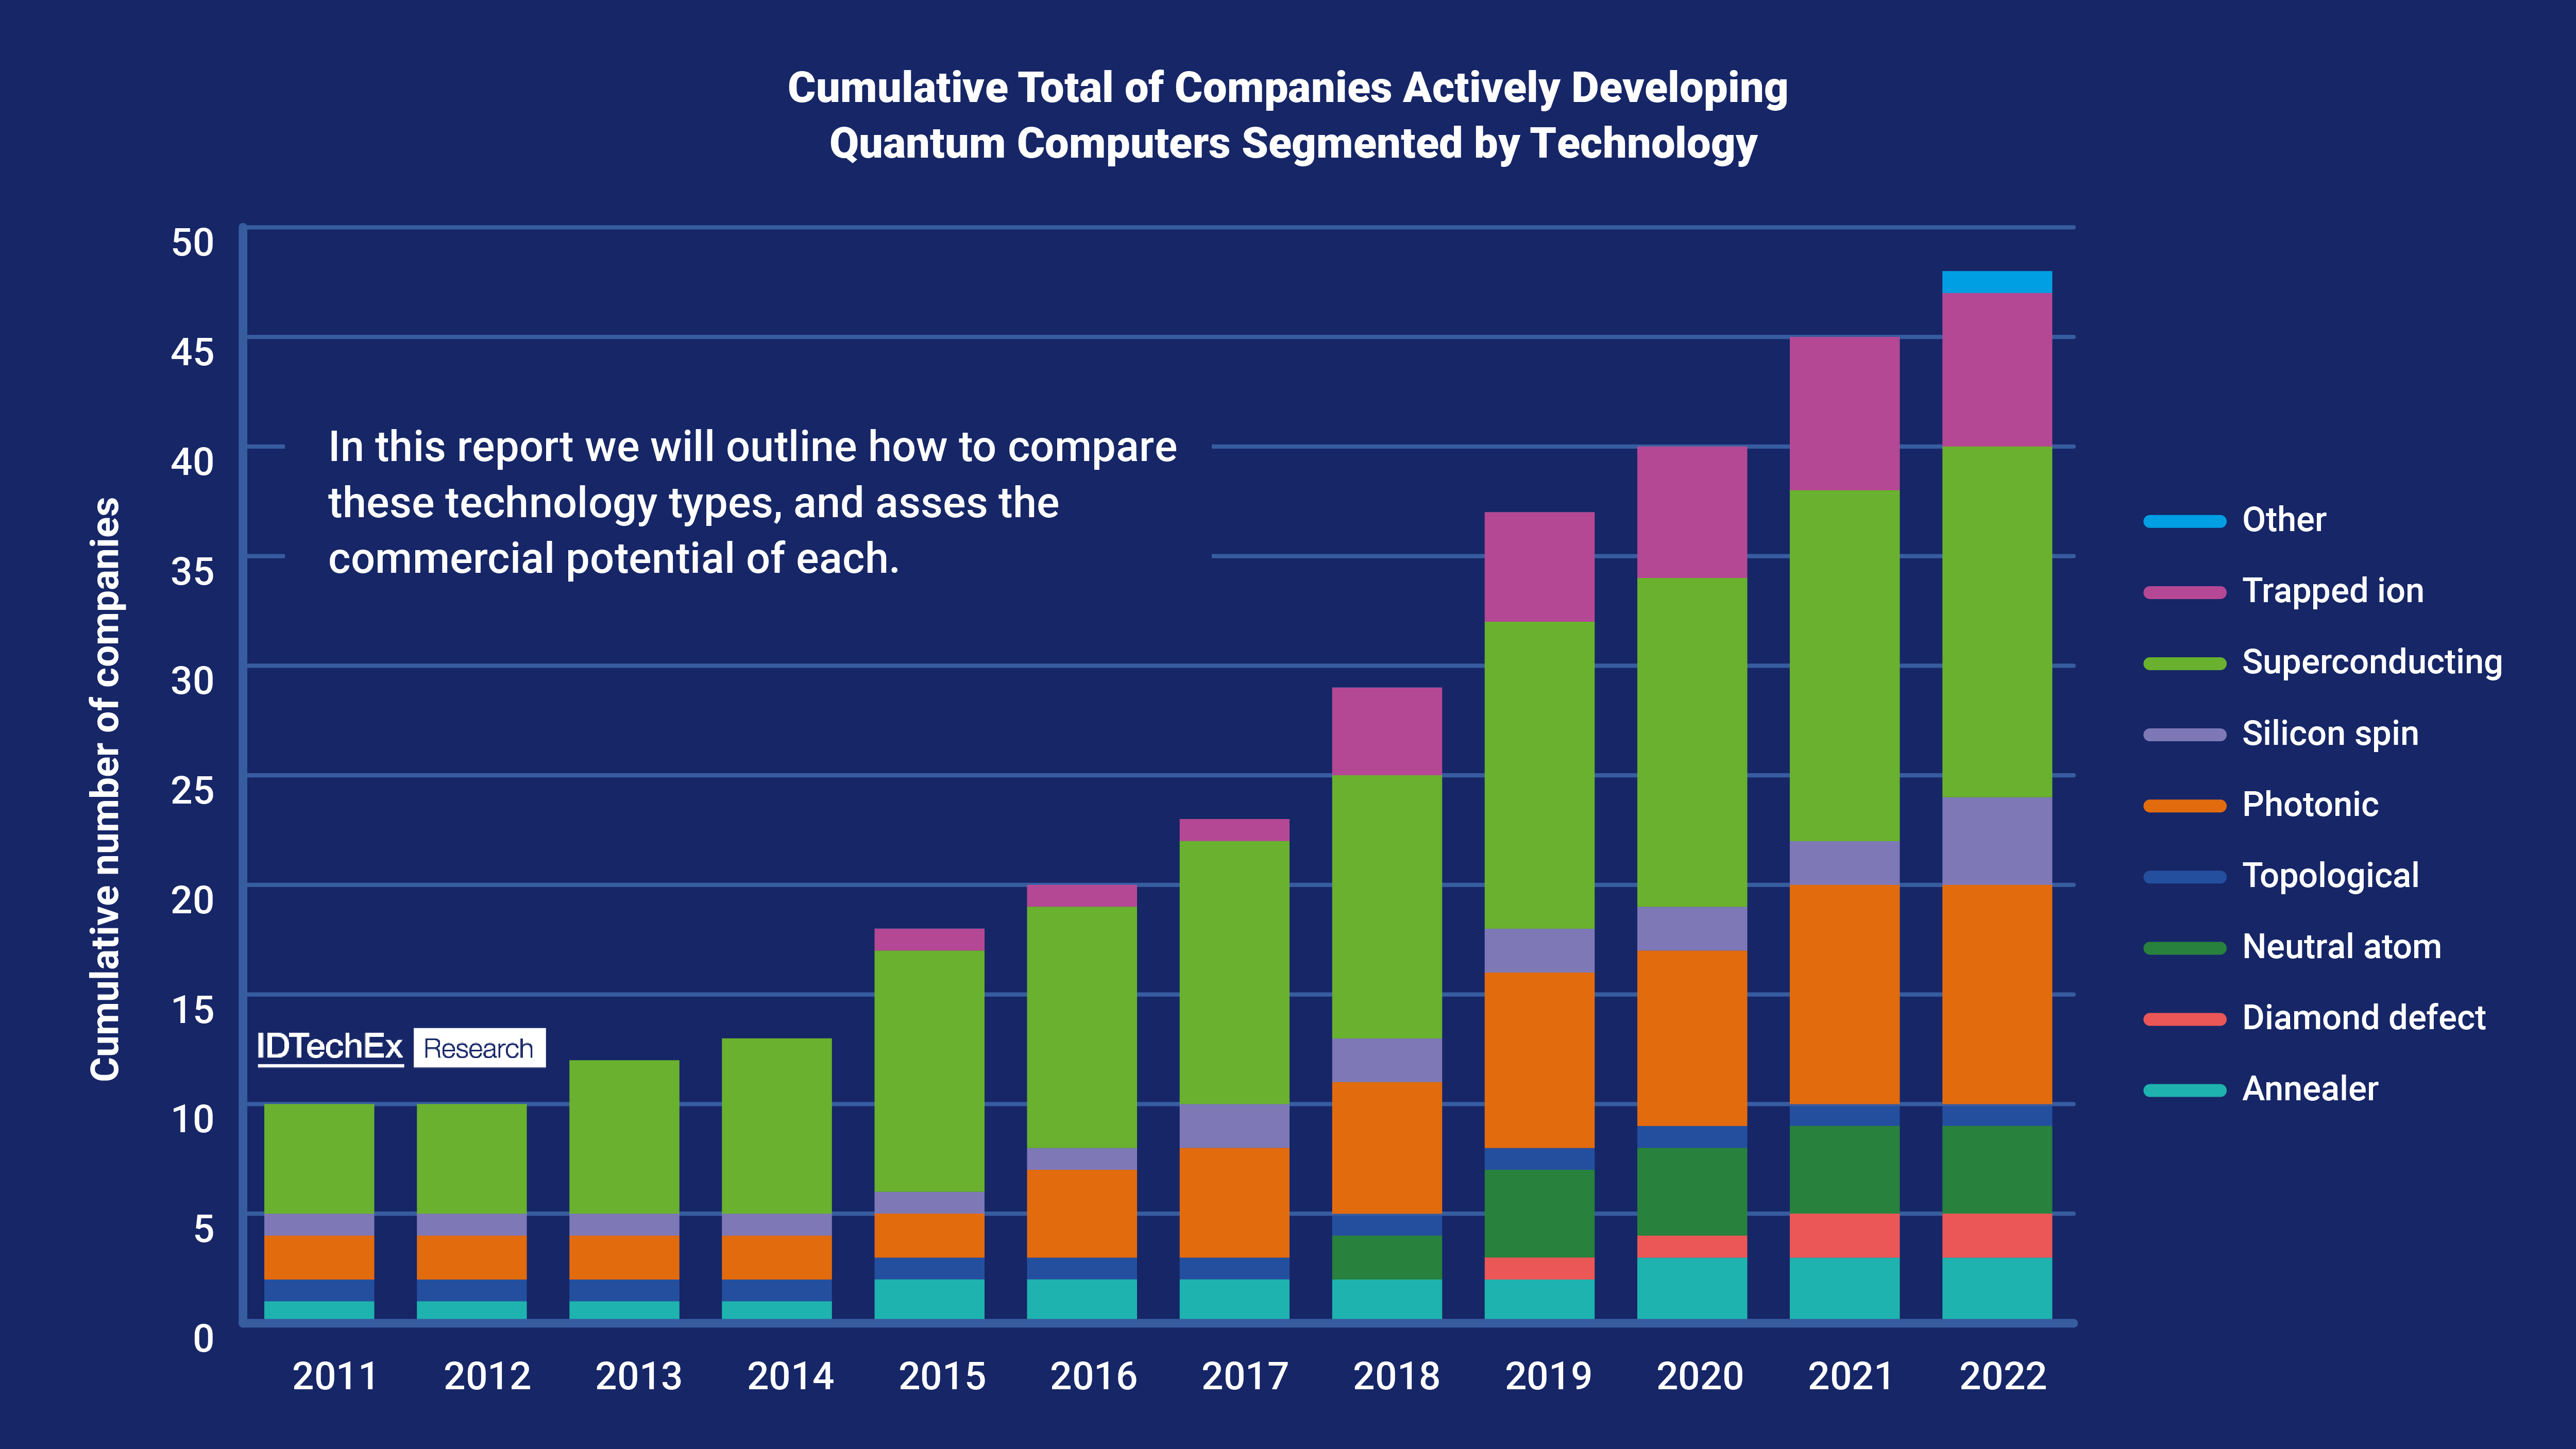 Cumulative total of companies actively developing quantum computers segmented by technology. Source: IDTechEx - “Quantum Computing 2023-2043”